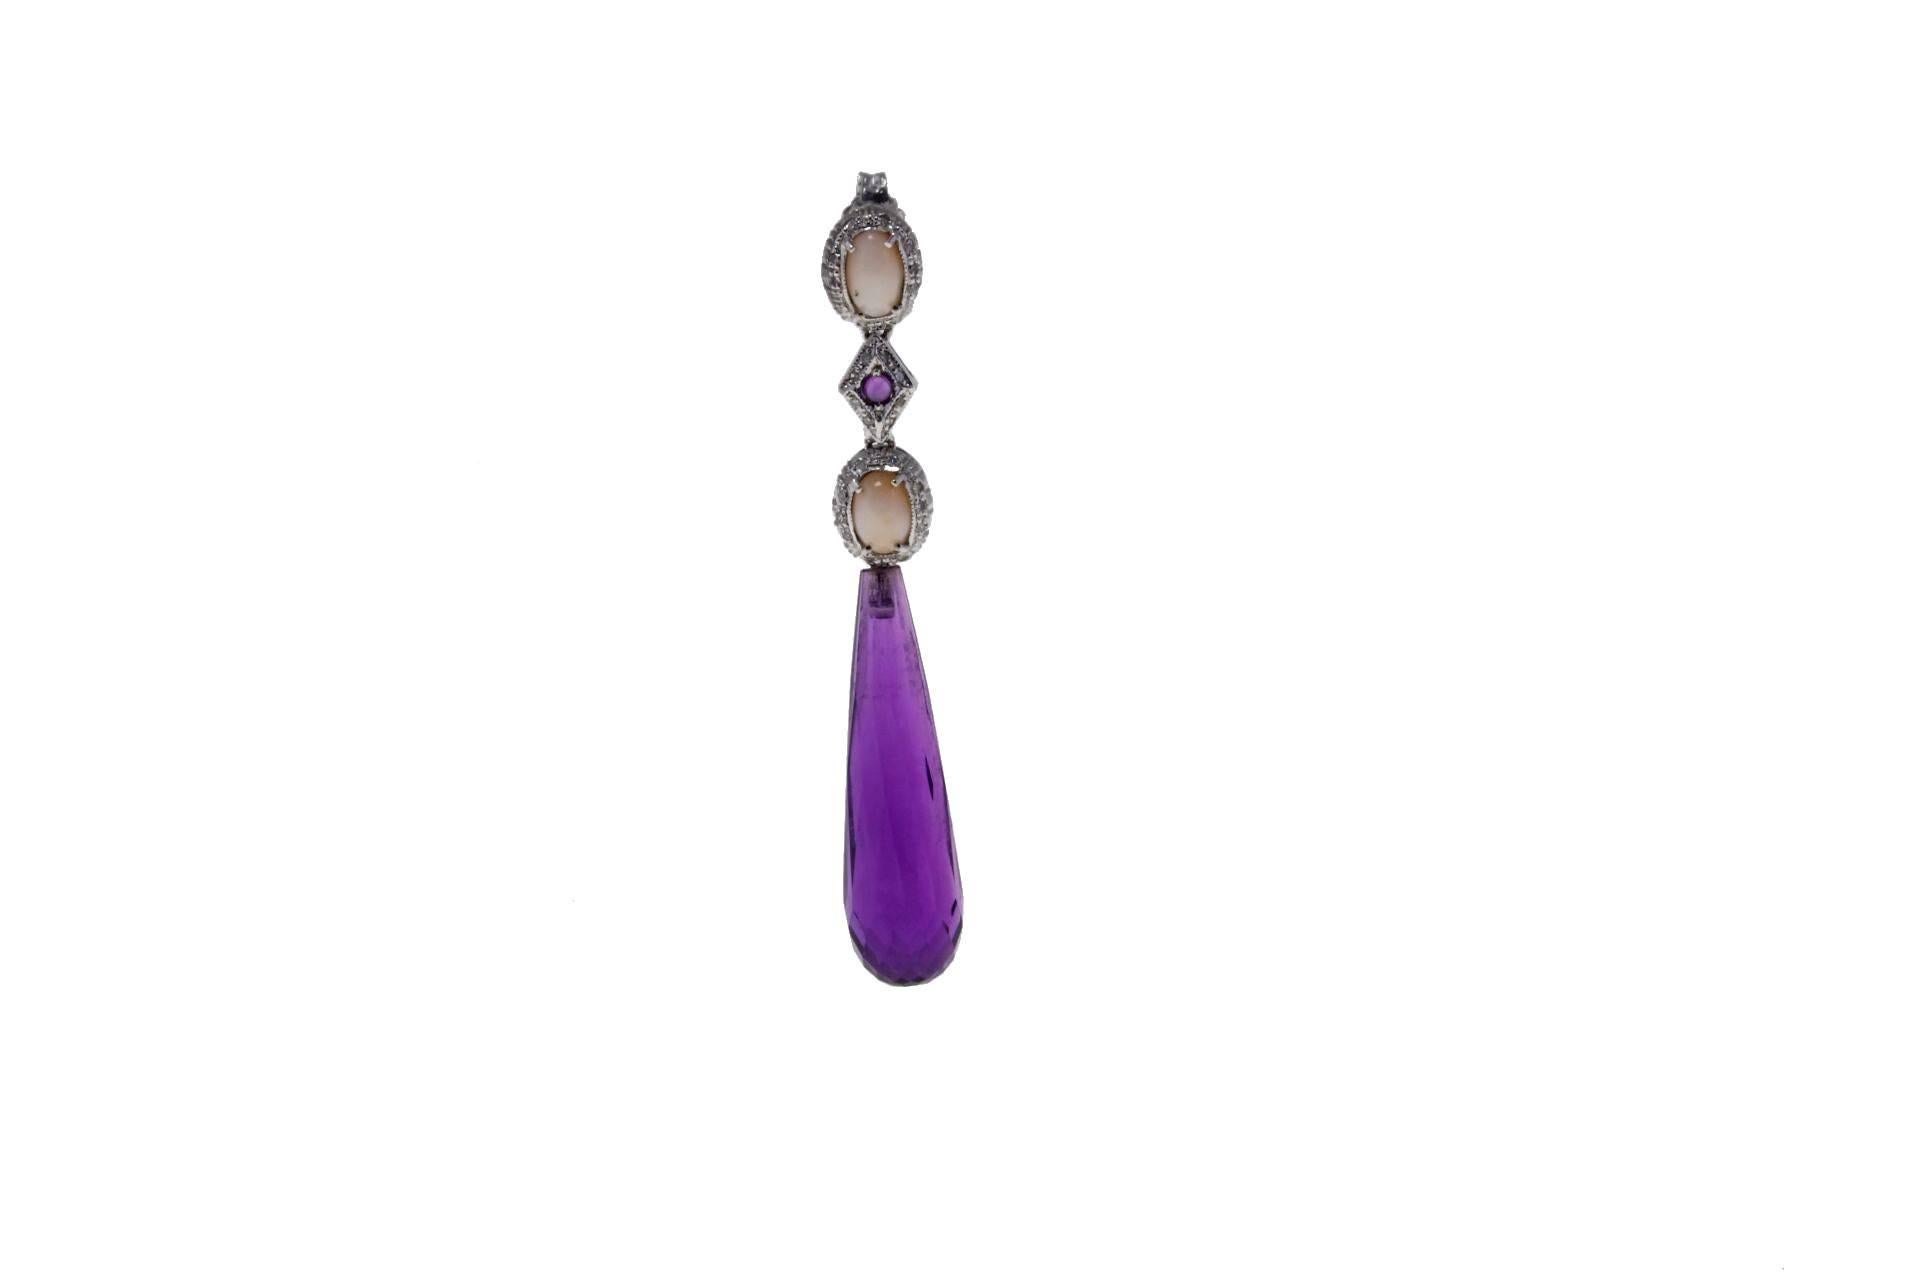 Dangle earrings in 14kt white gold composed of two pink corals surrounded by diamonds linked together by a rhombus of dioamonds with a central amethyst. On the bottom a drop of amethyst.

diamonds 0.30kt
tot weight 9.0gr
r.f.  gcuf